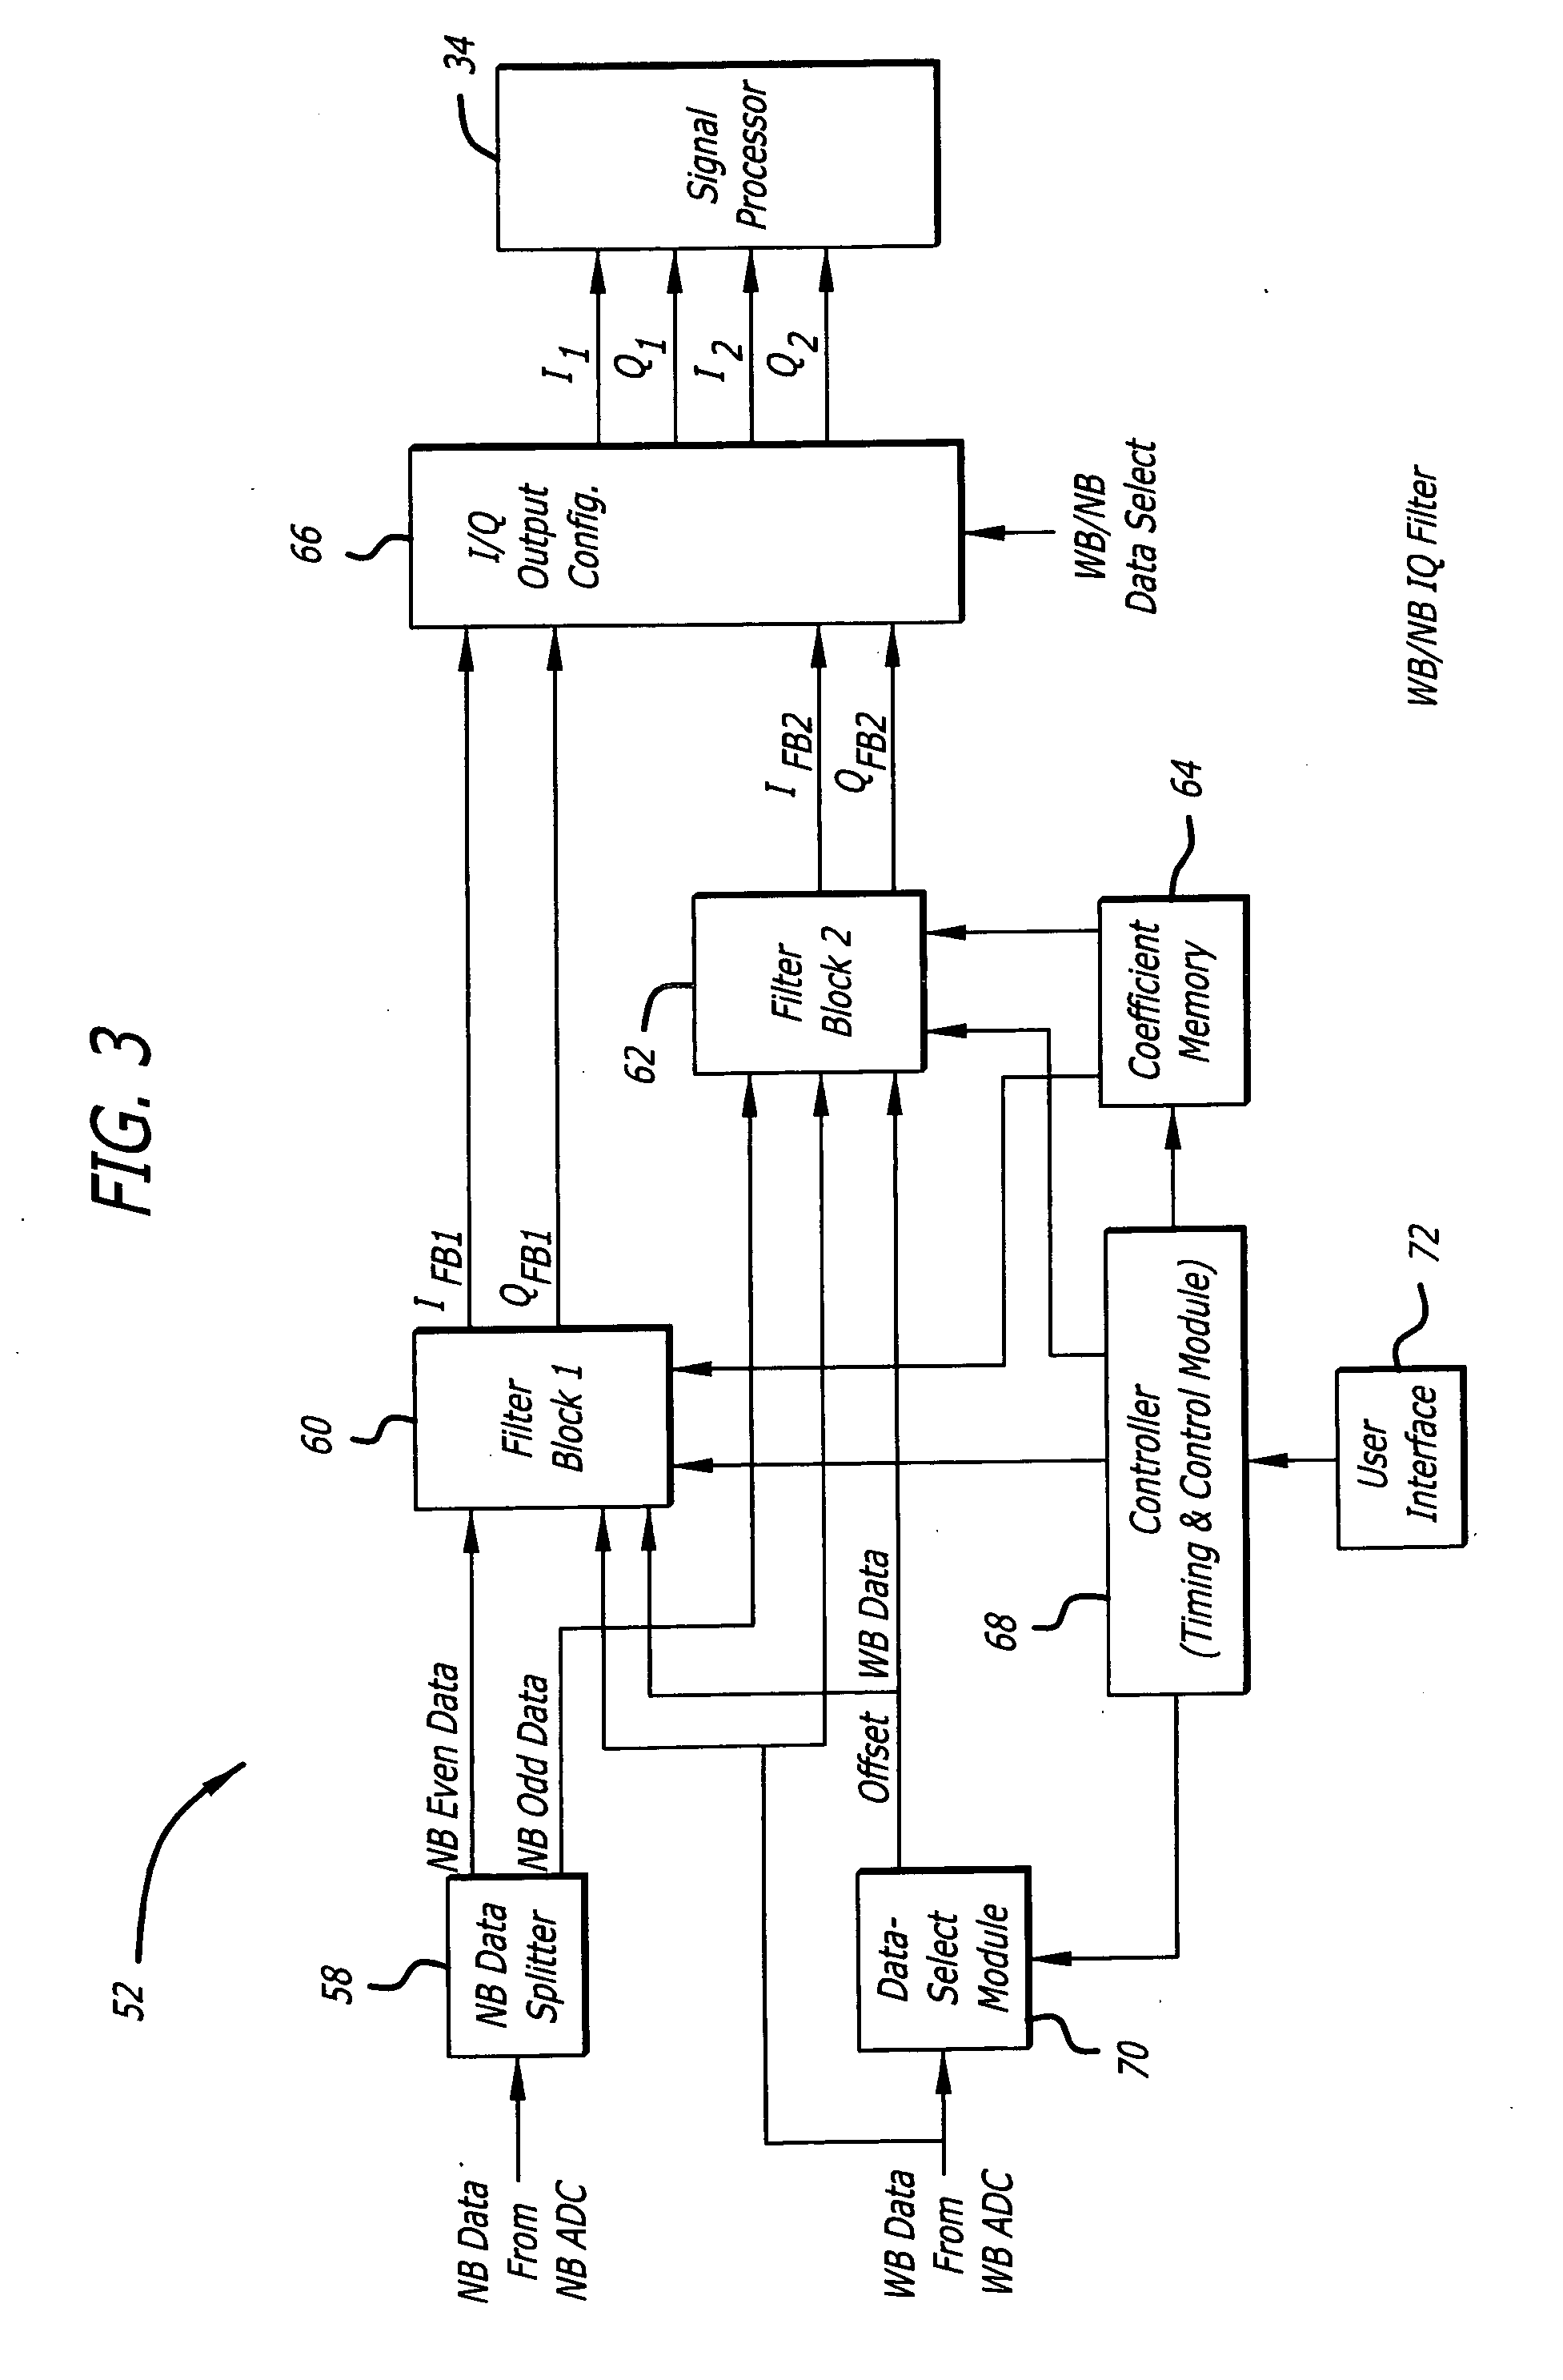 Configurable filter and receiver incorporating same